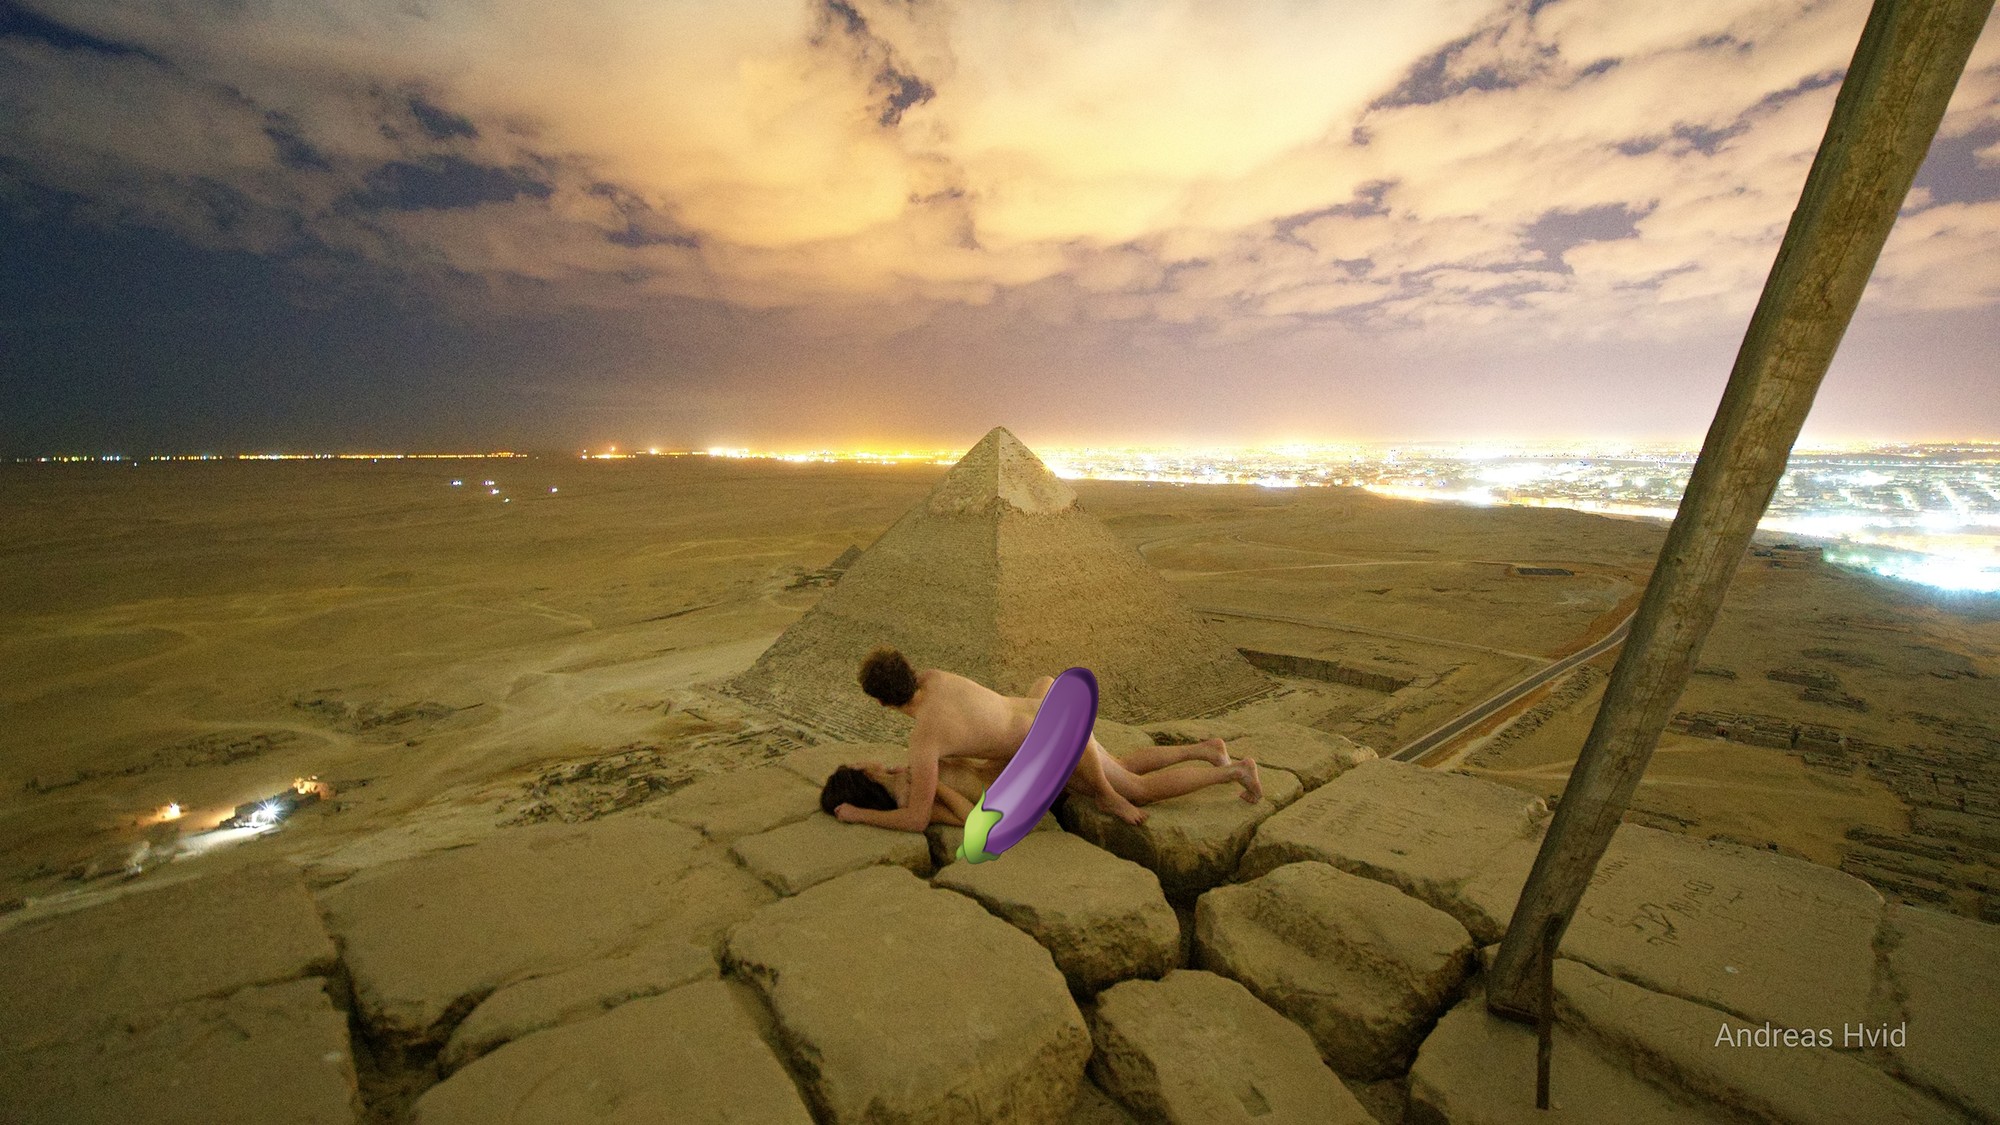 Italian Nudist Couples - Photo of Couple Boning on Top of Pyramids Prompts ...